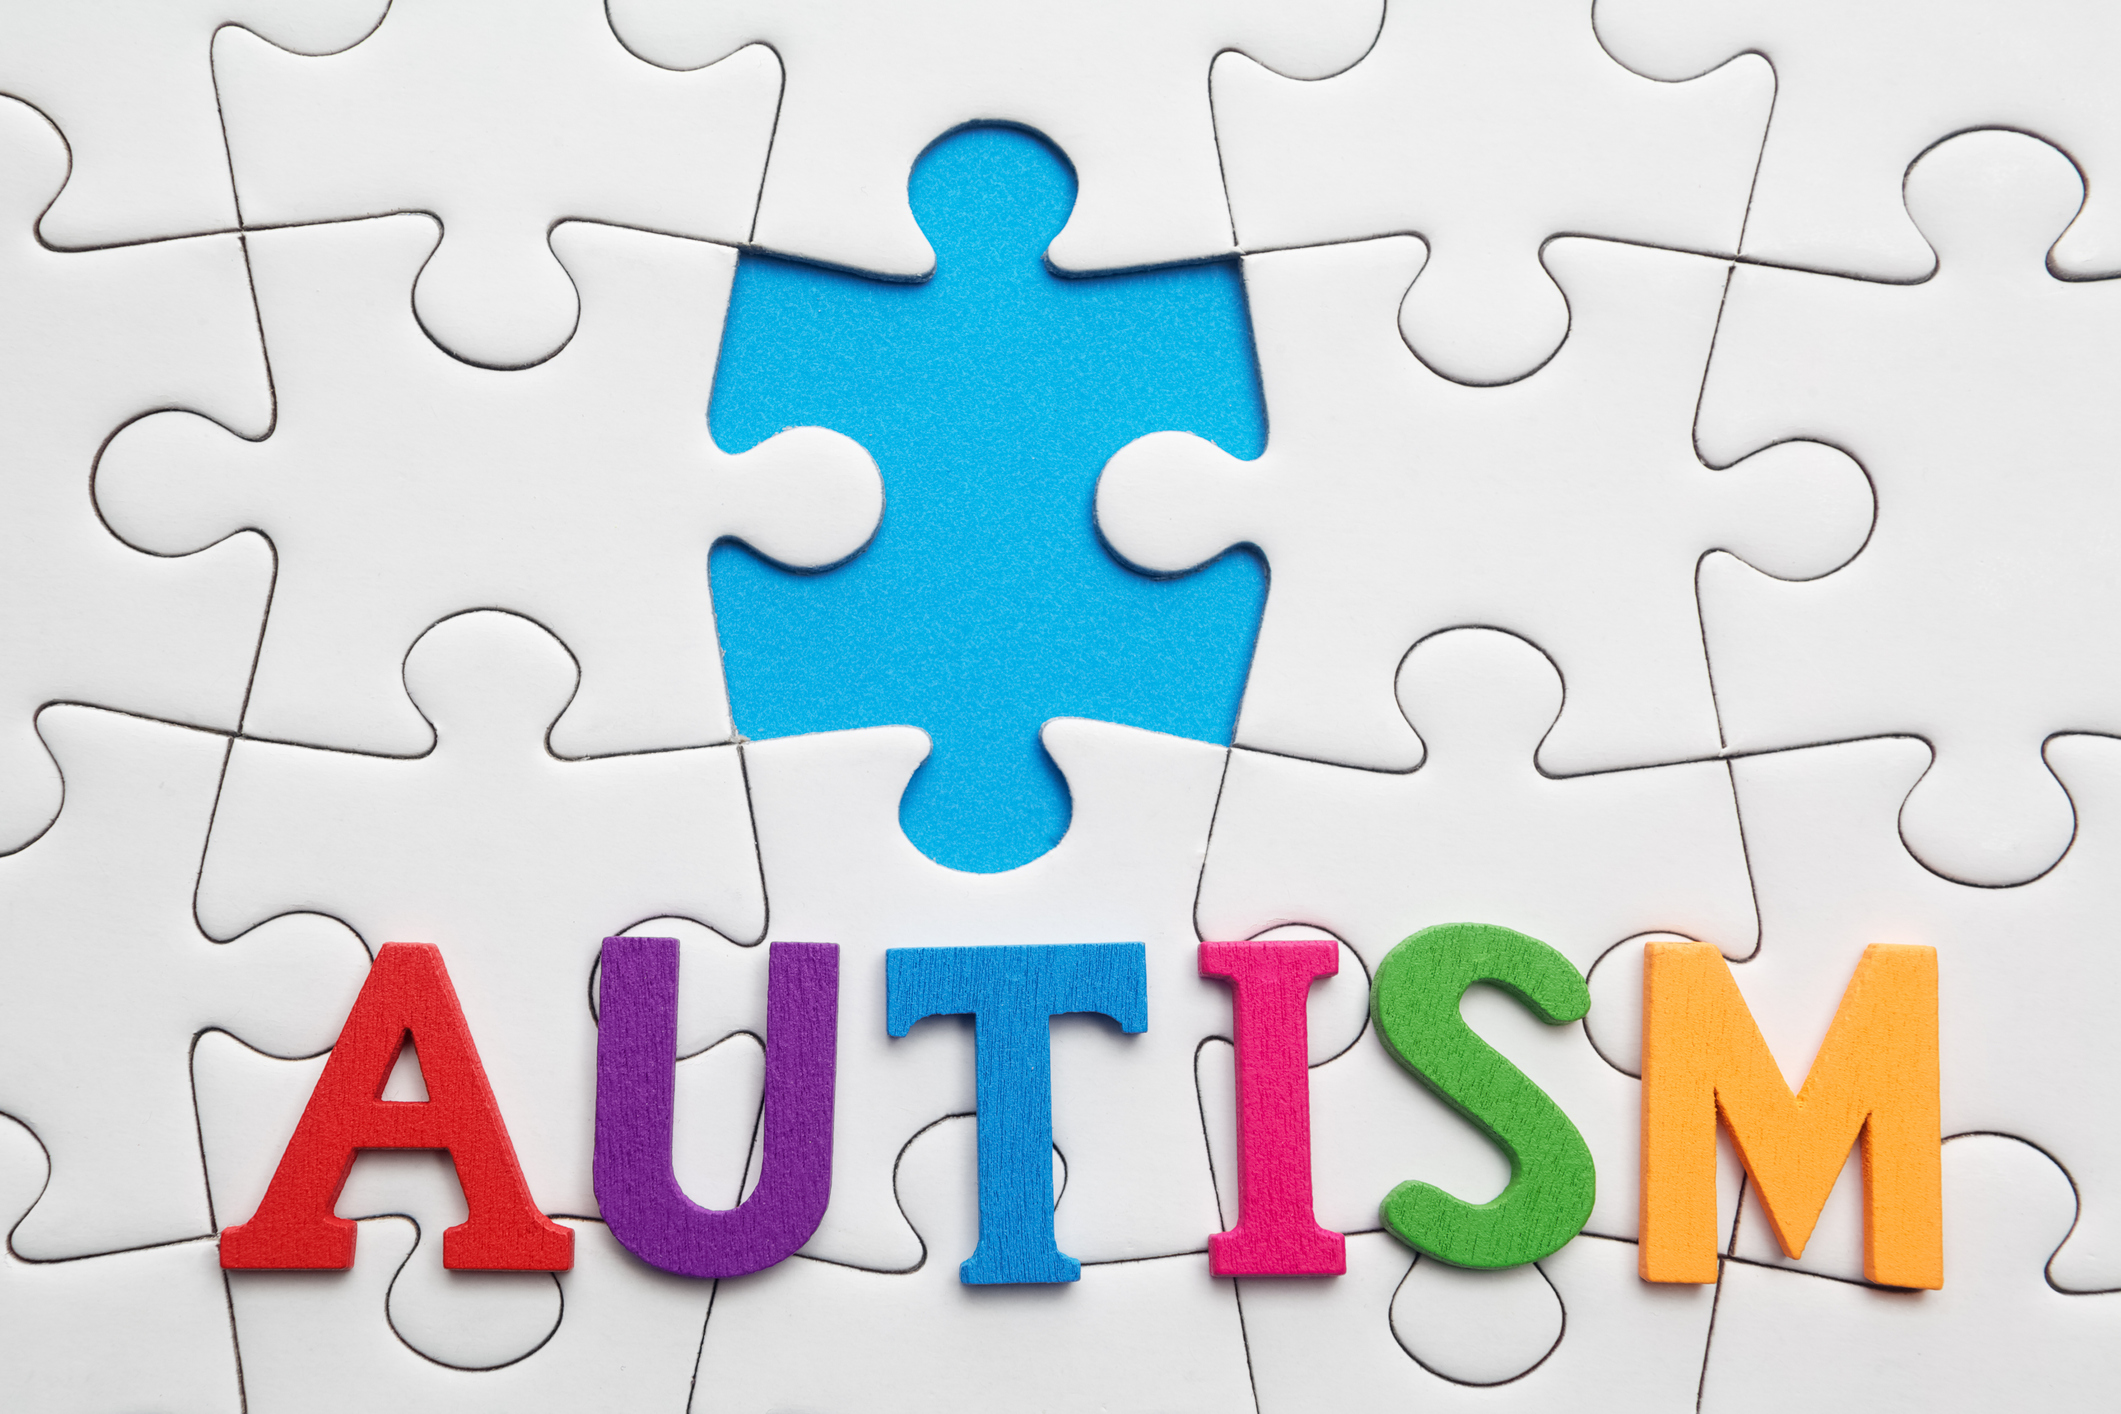 Autistic people often struggle to fit in